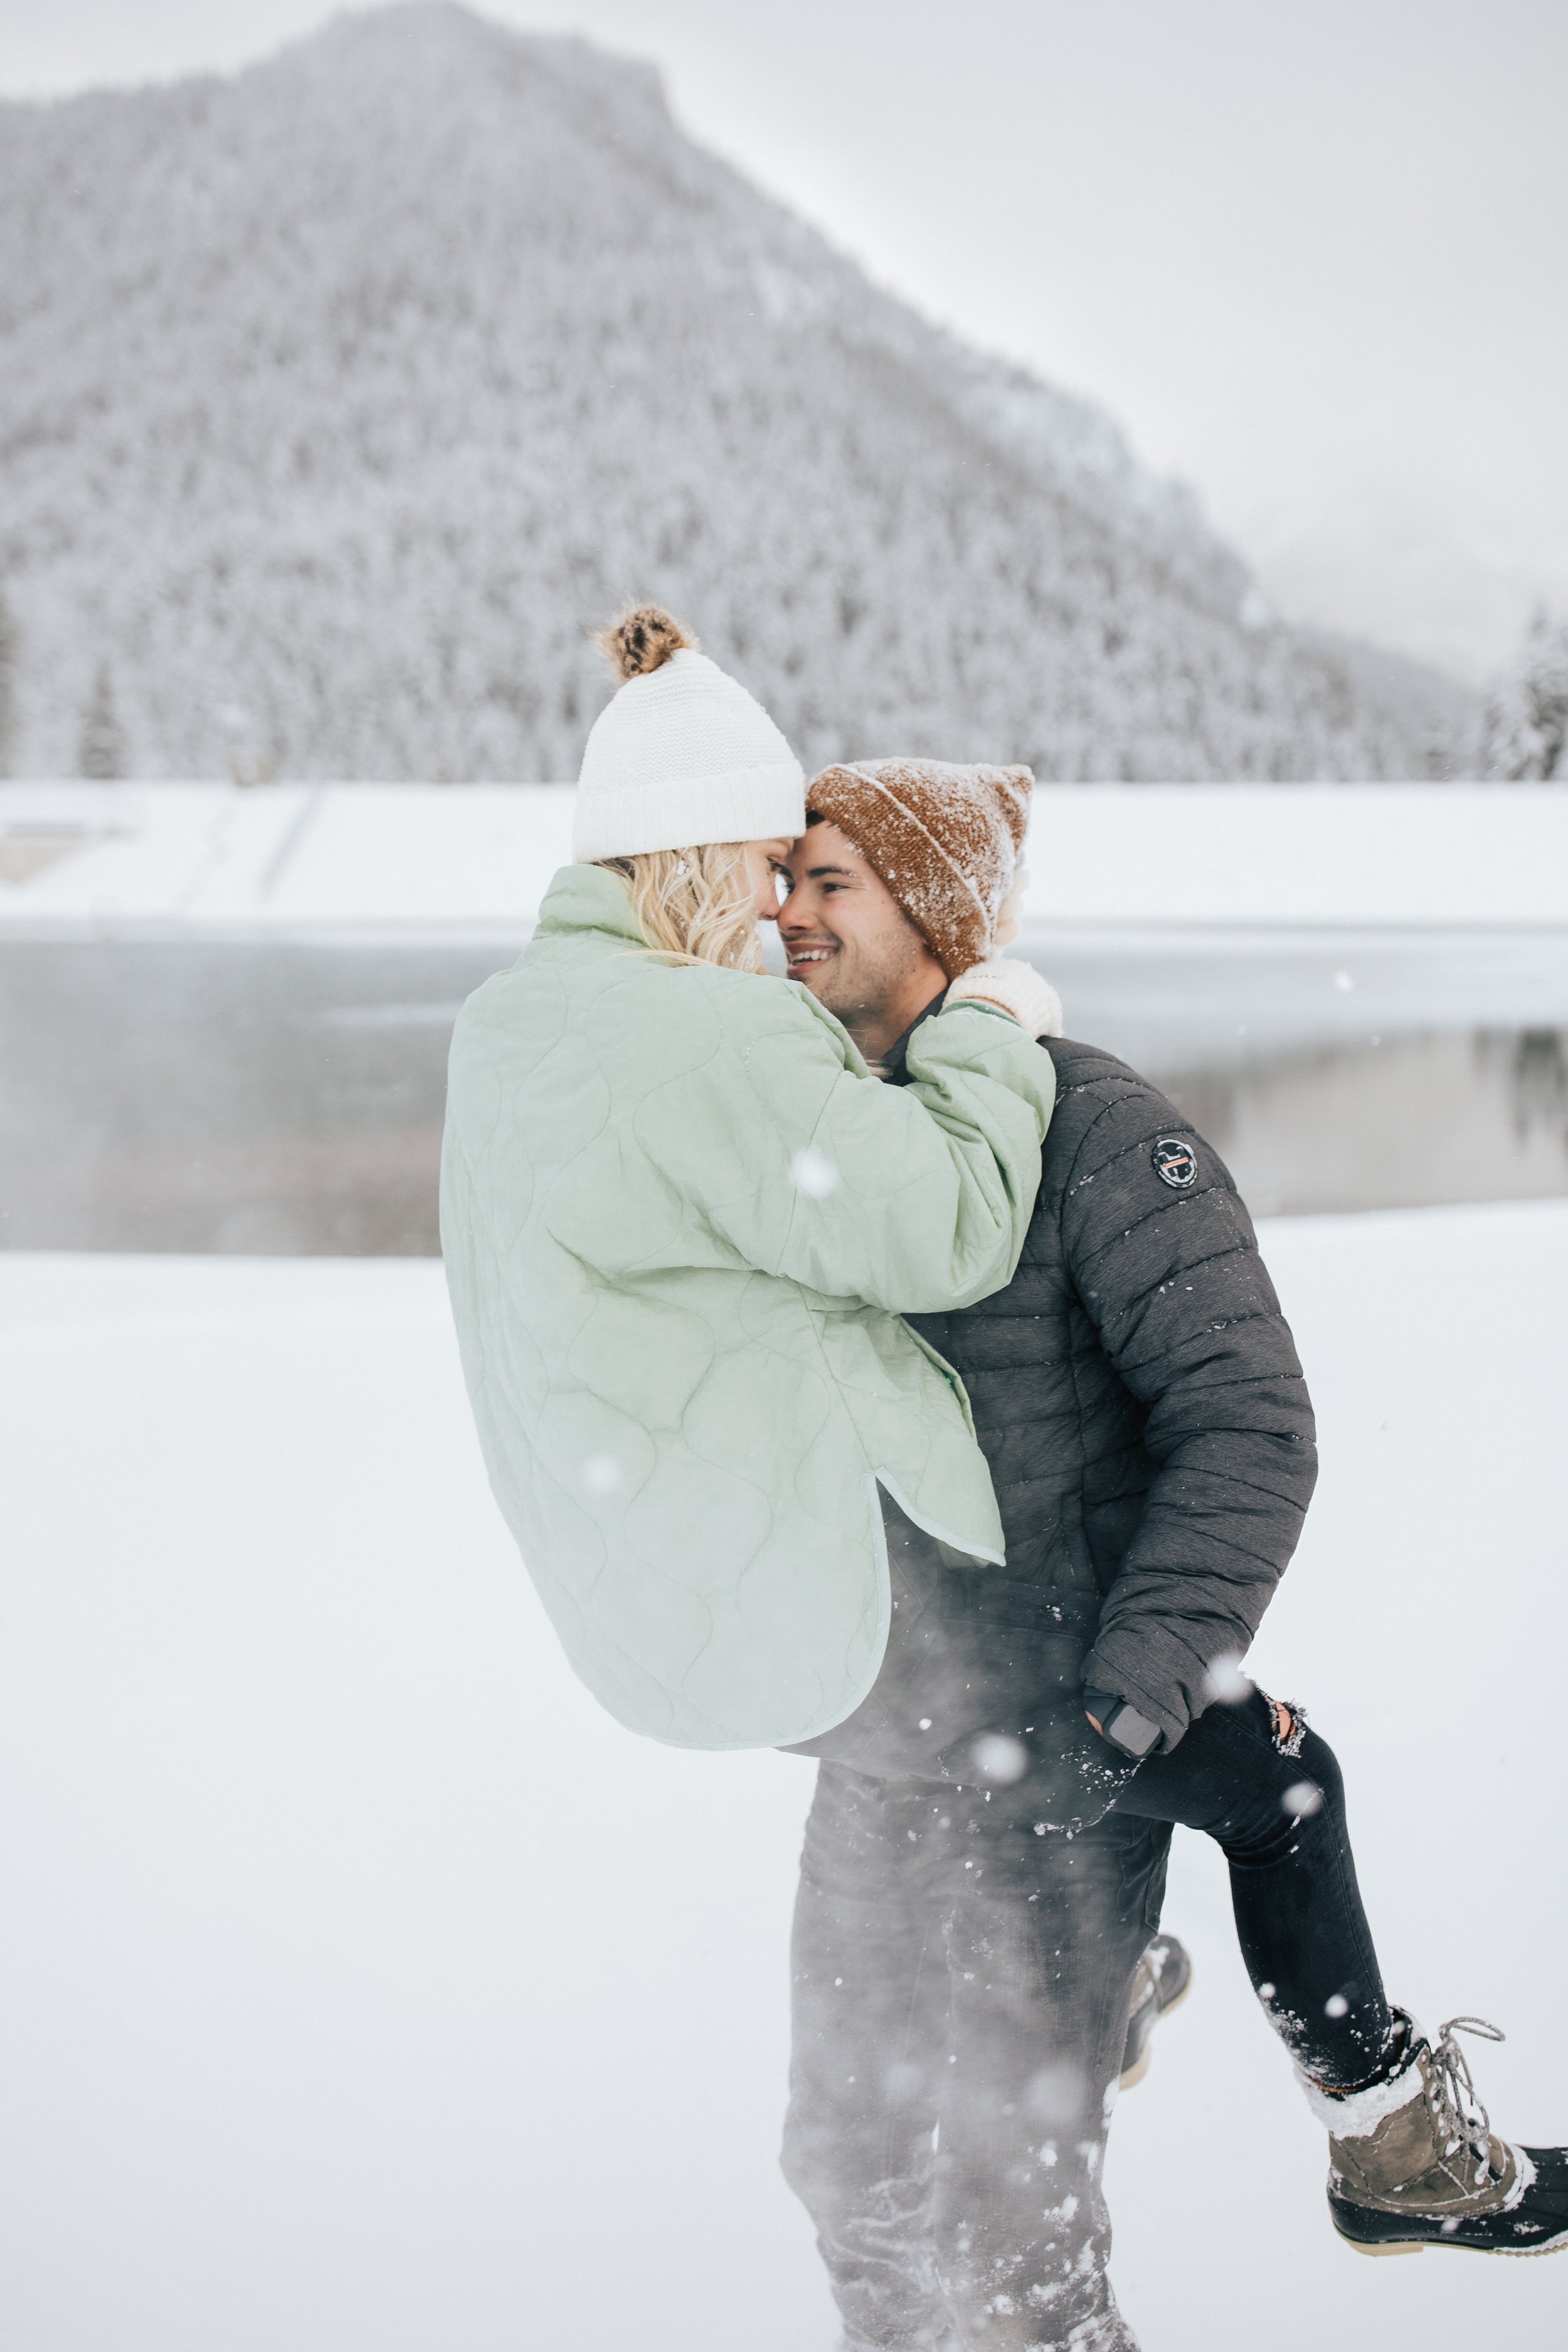  Snowball fight during couples photoshoot in the Utah mountains couple hugs as it's snowing covered in snowflakes engagement session winter outfit inspo #outfitinspo #parkcityphotographer #engagements #winterengagements girl jumping into guy’s arms 